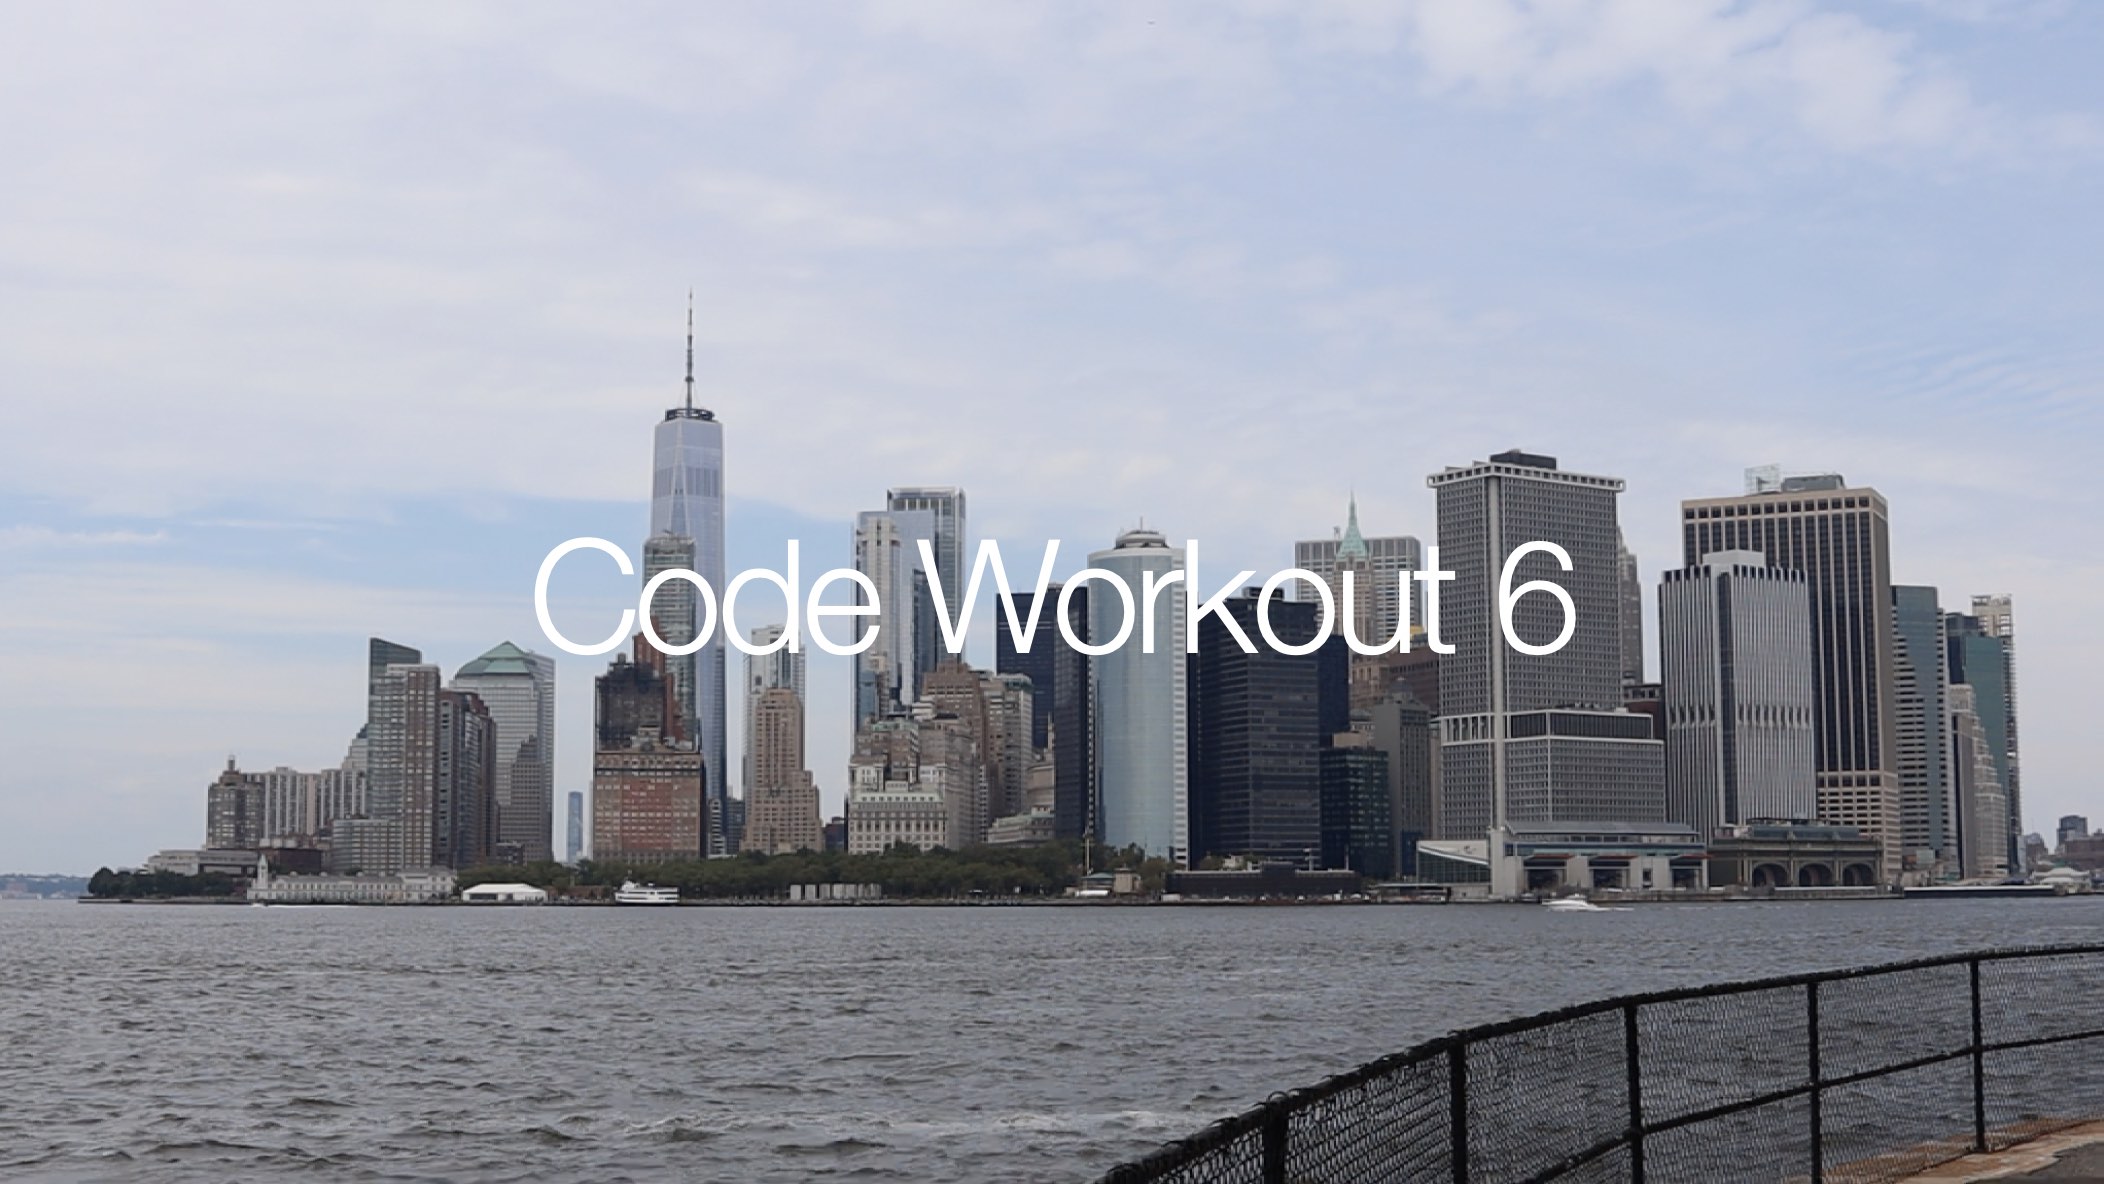 Code Workout 6